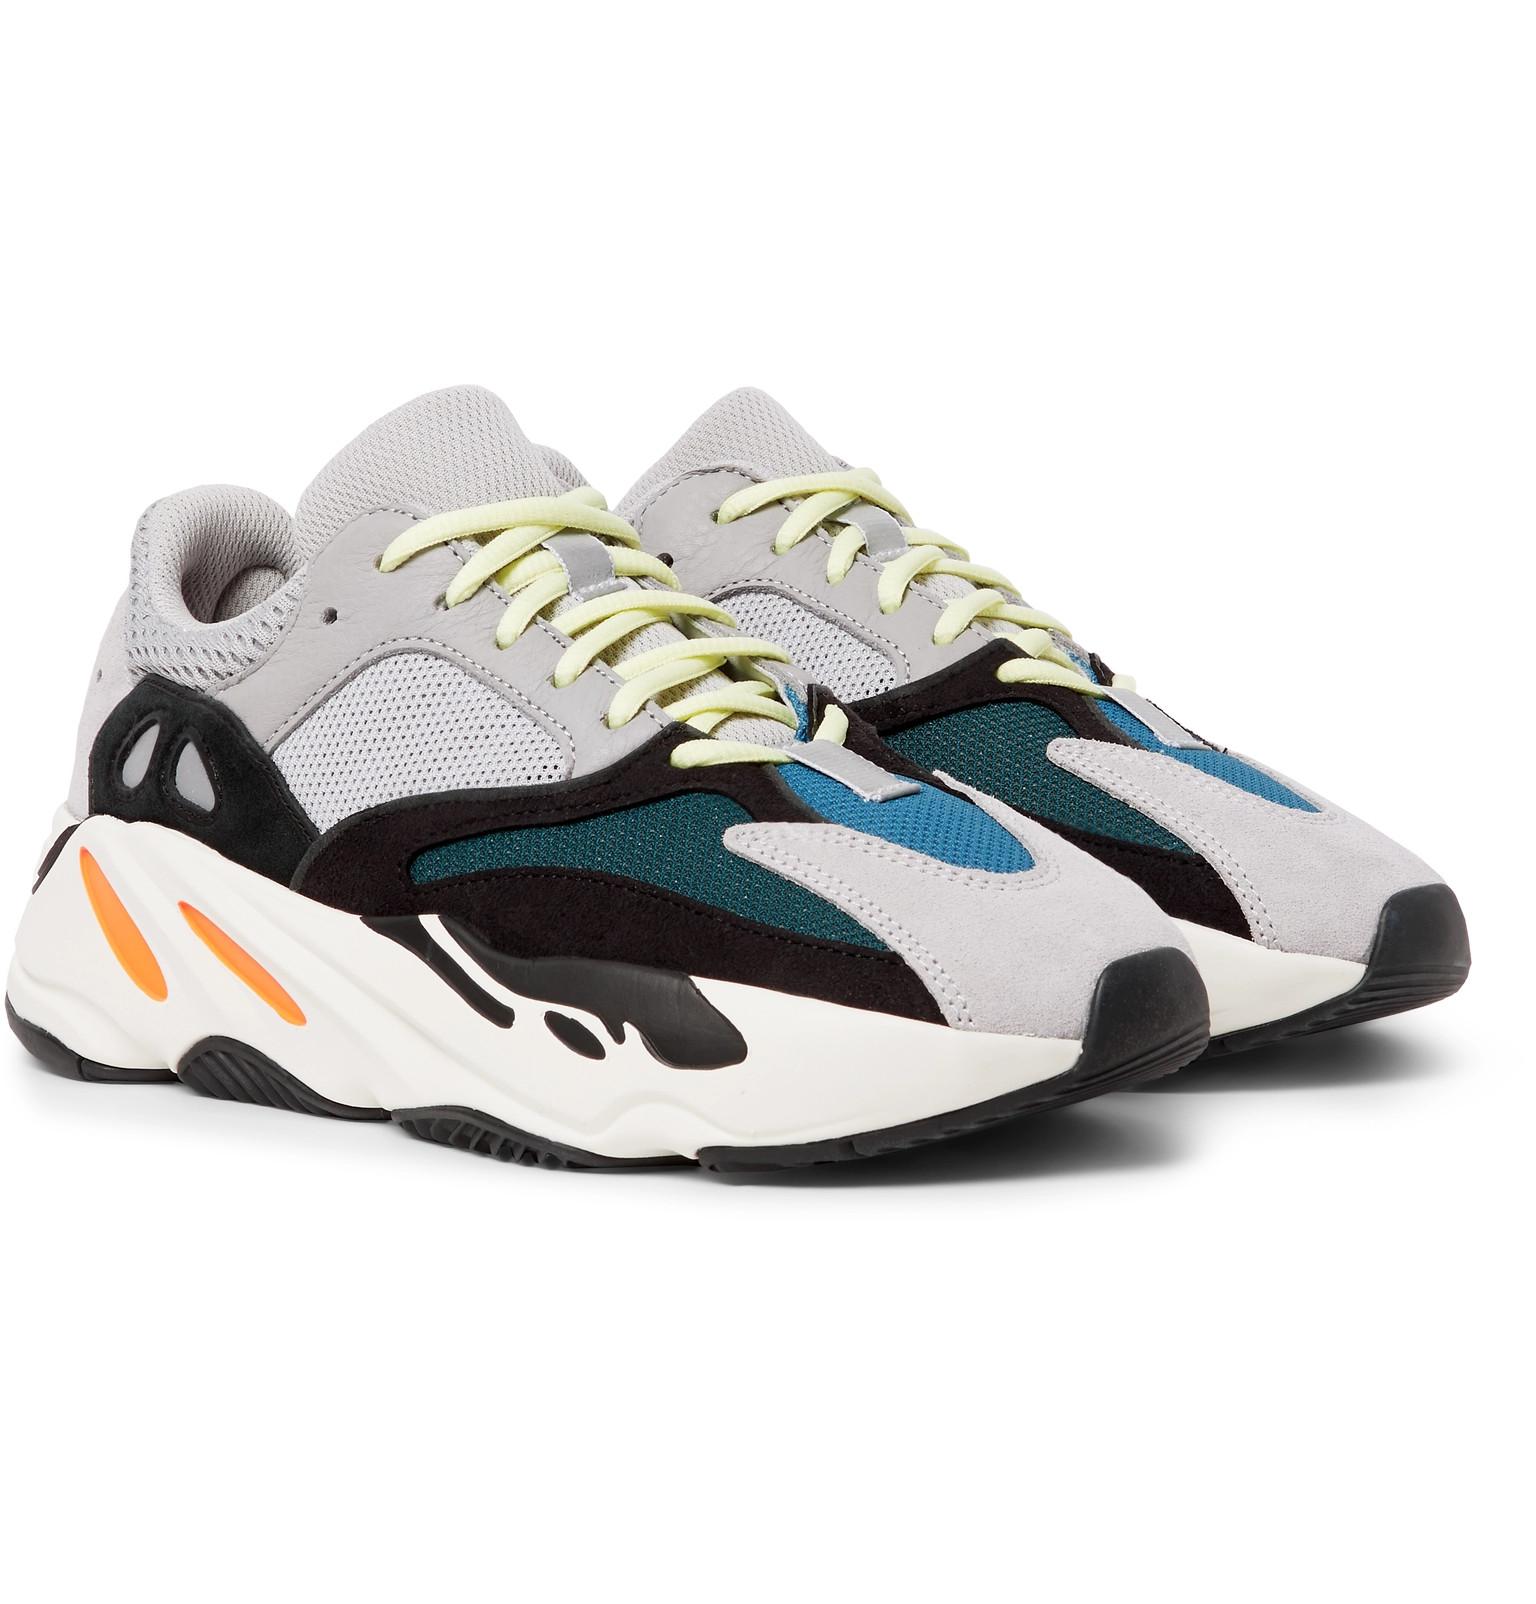 adidas Originals Yeezy Boost 700 Suede, Leather And Mesh Sneakers in ...